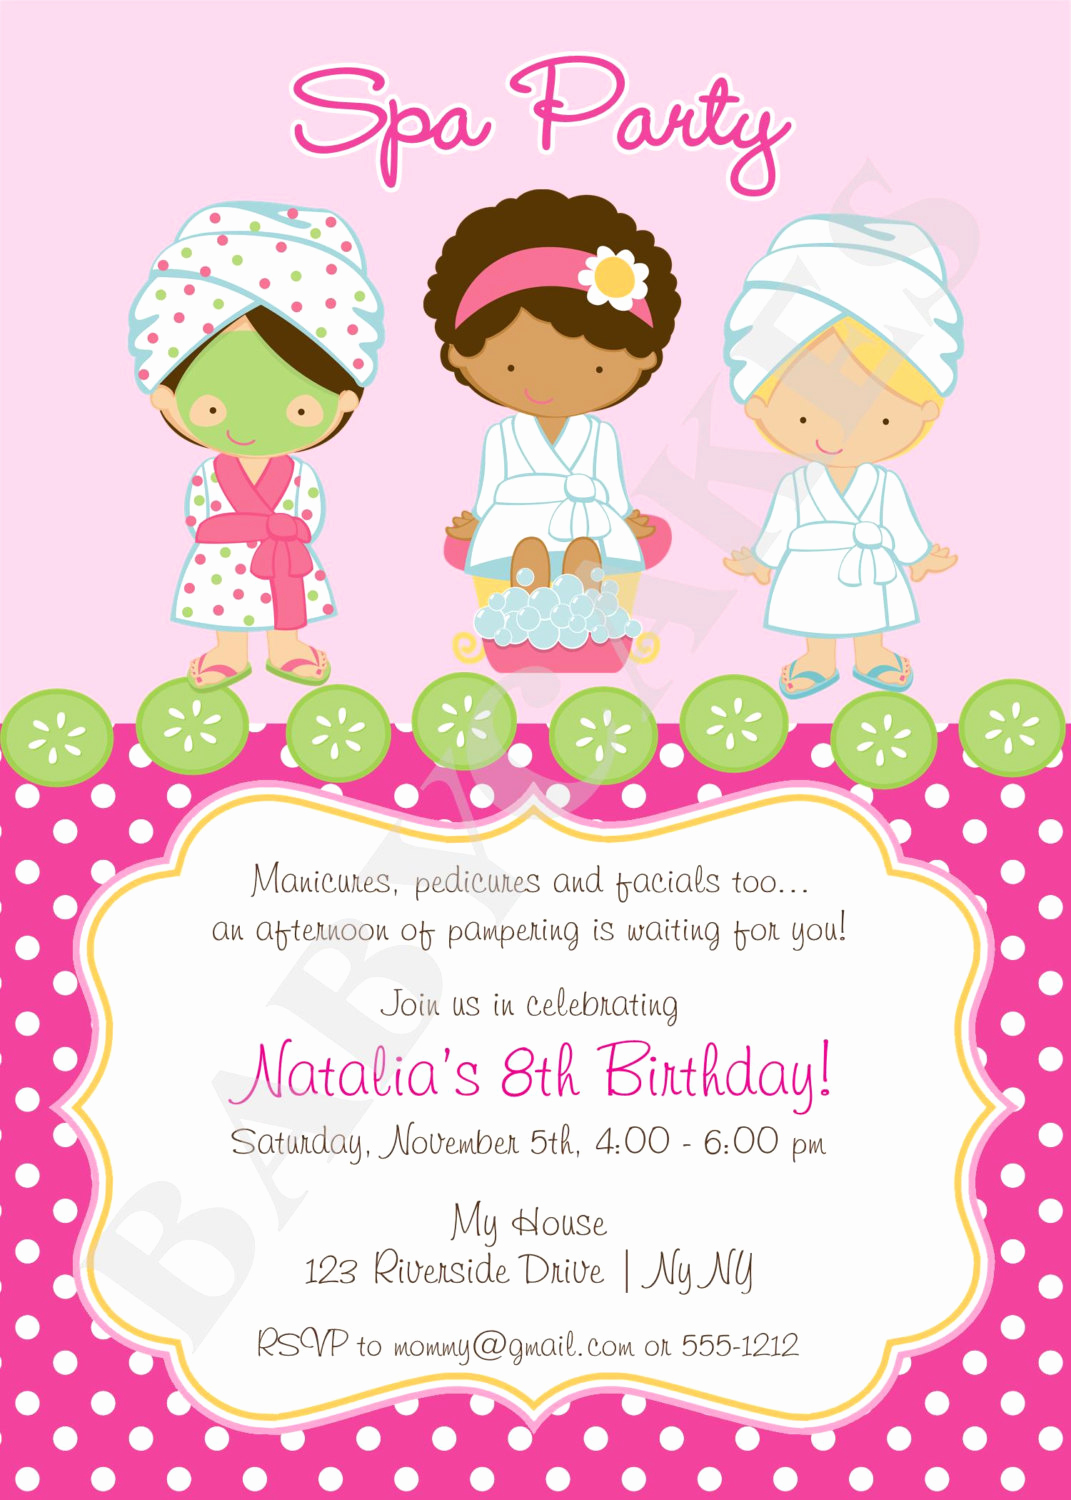 Spa Party Invitation Wording Awesome Spa Party Invitation Diy Print Your Own Matching by